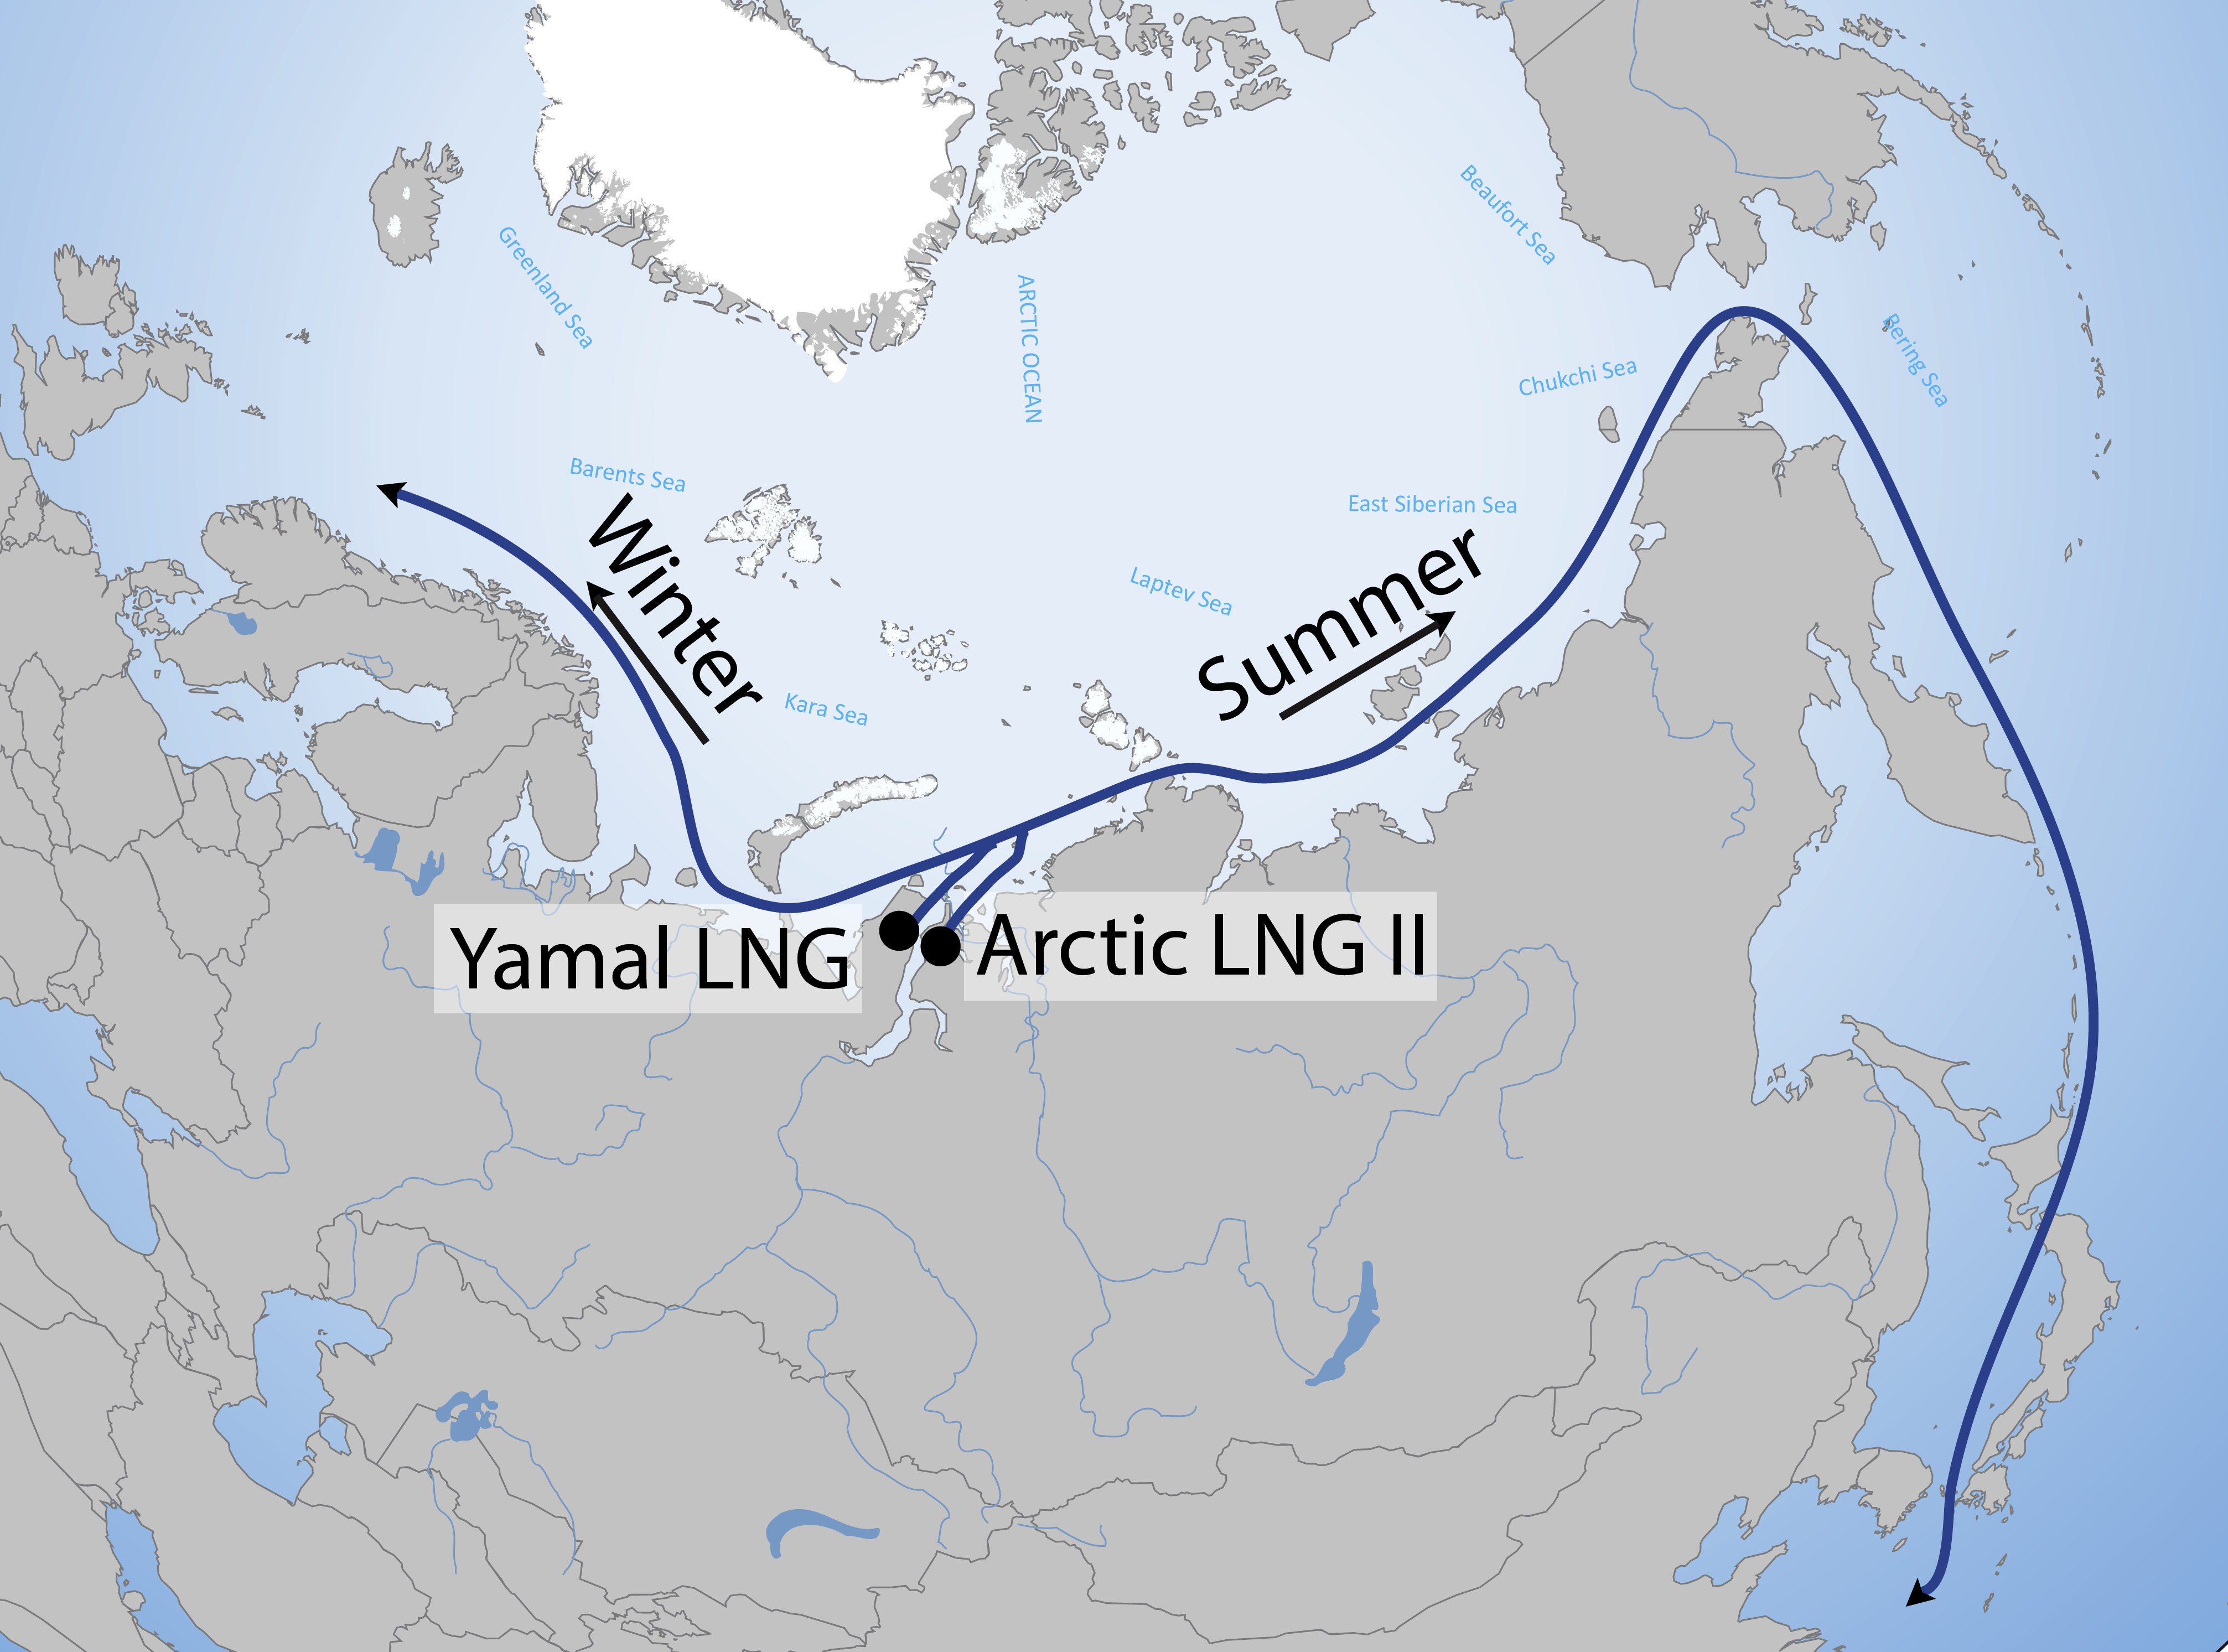 Location of Yamal LNG and Arctic LNG 2 and proposed export routes via the Northern Sea Route during summer and winter (Malte Humpert / High North News)